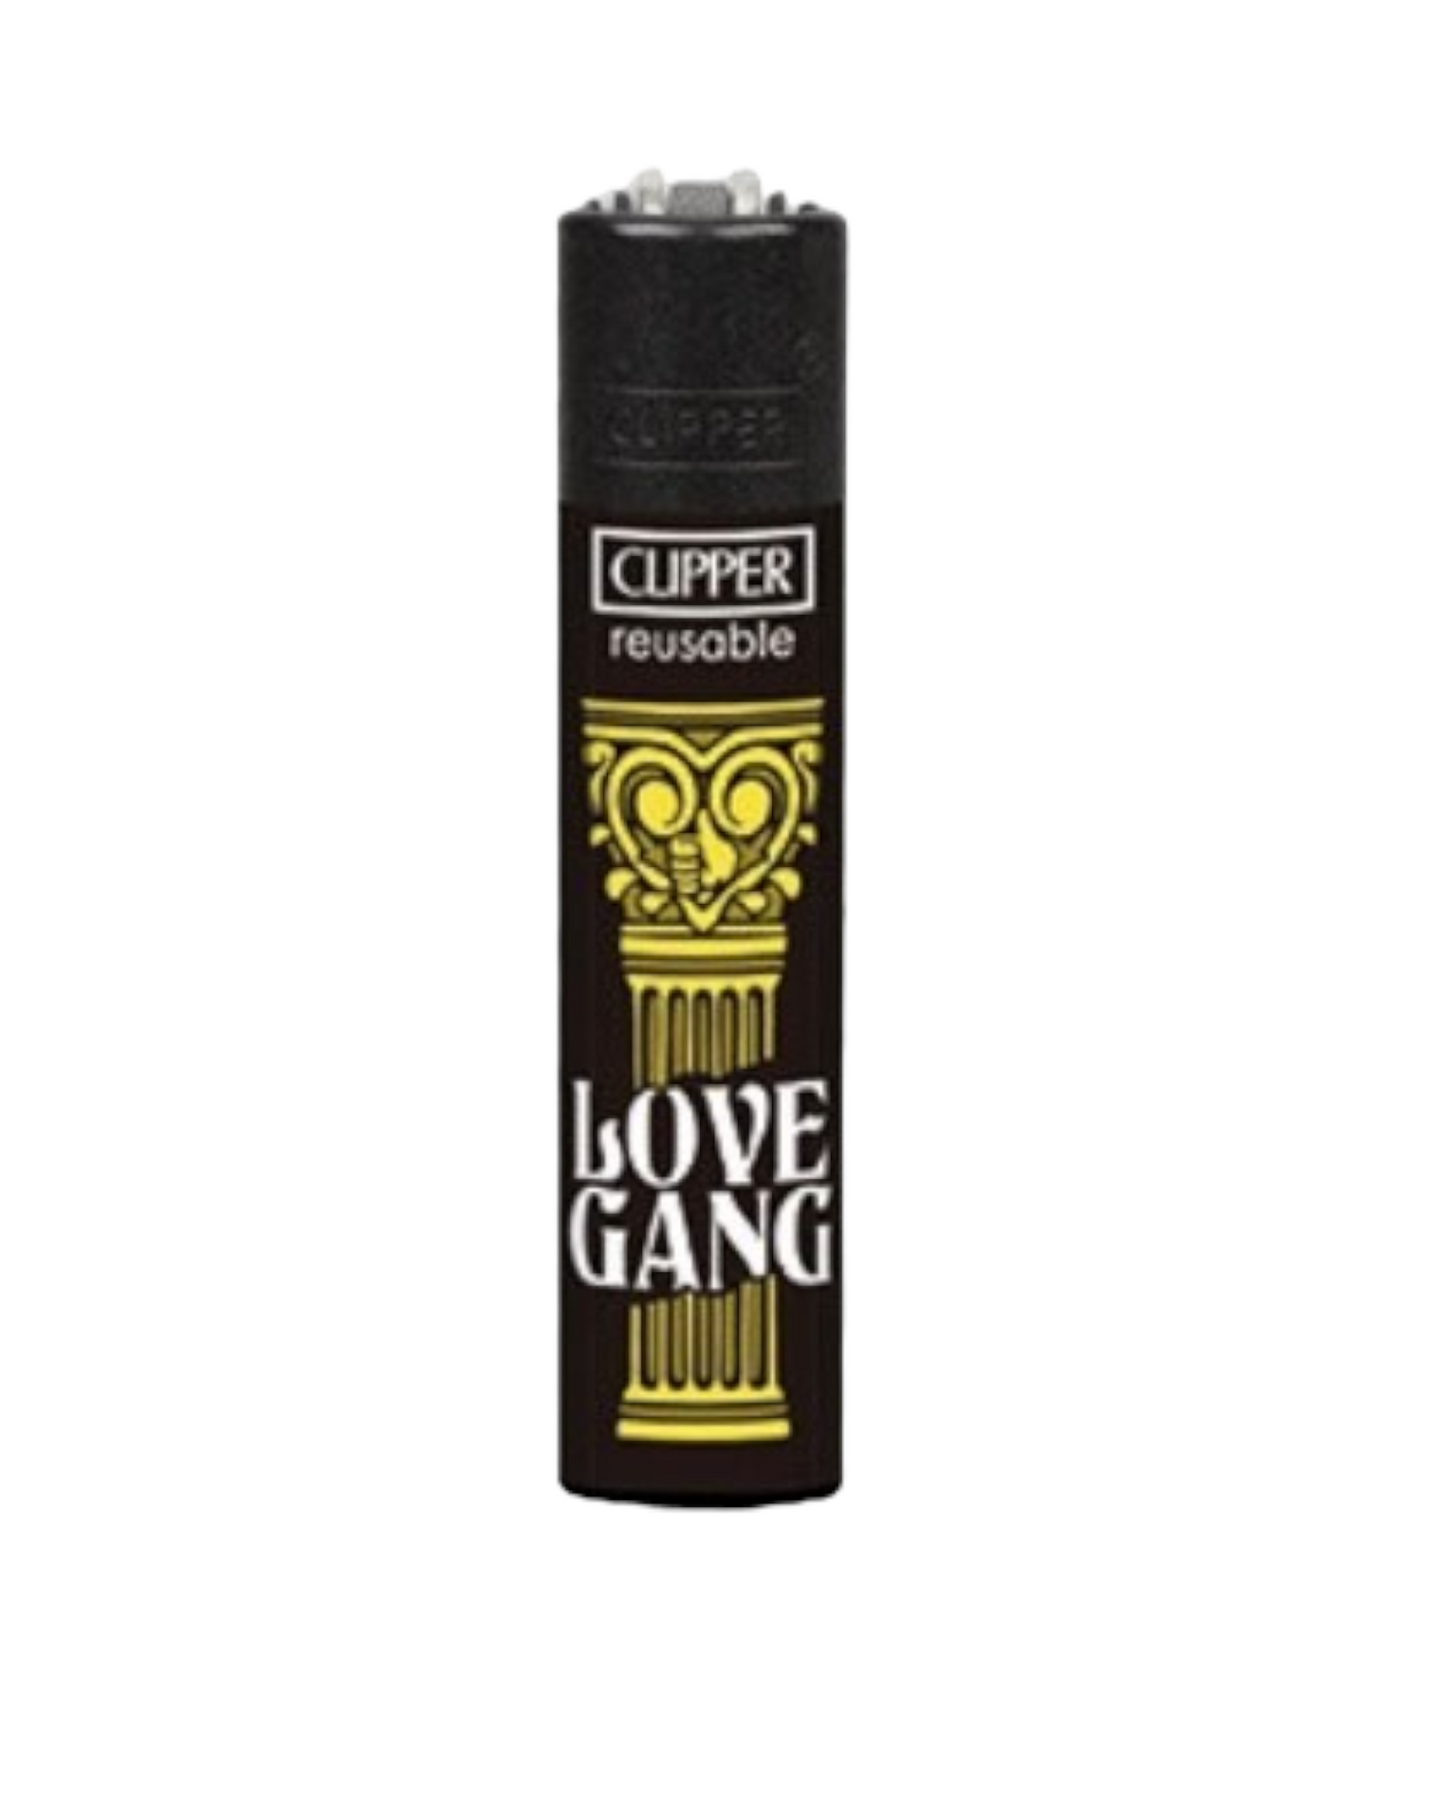 Lovegang x Clipper - Full Collection